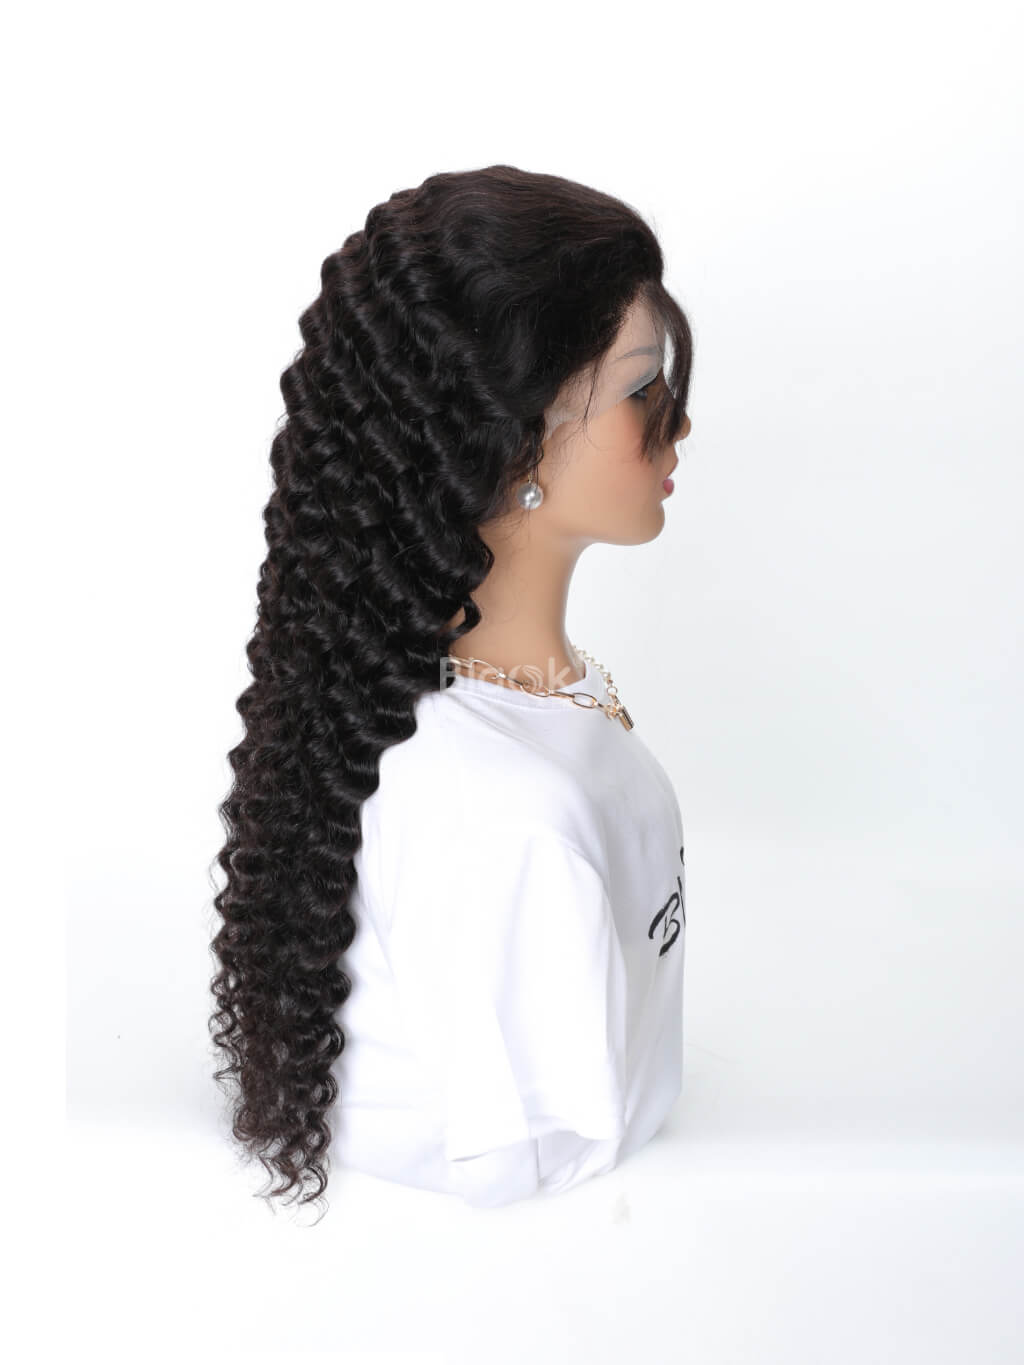 Deep wave lace frontal wig  Front hair styles, Curly lace wig, Curly wigs